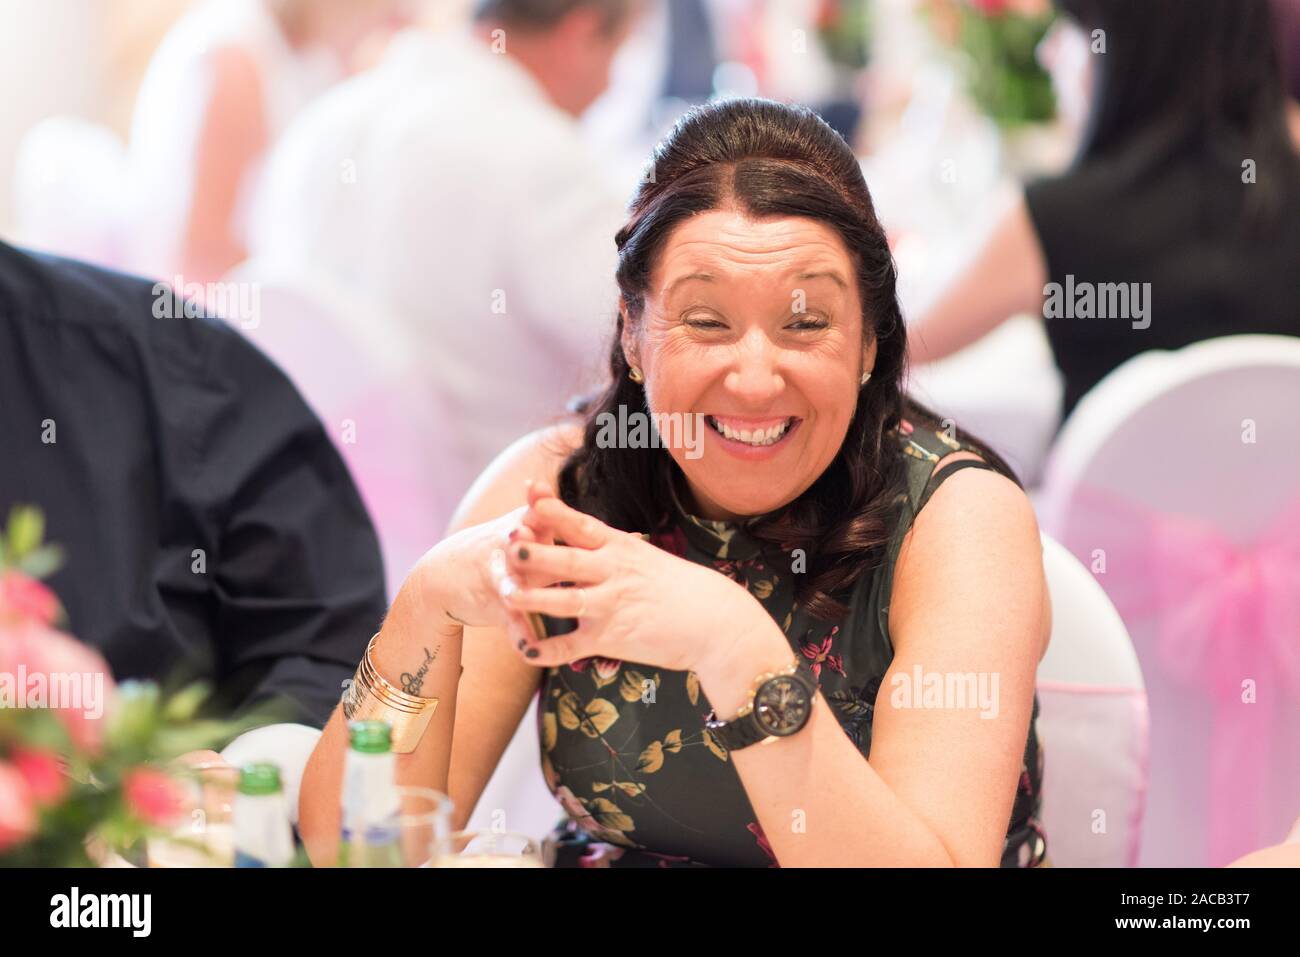 Wedding guests smiling, laughing and having fun at the wedding breakfast, letting their hair down after the ceremony and onto the reception, weddings Stock Photo